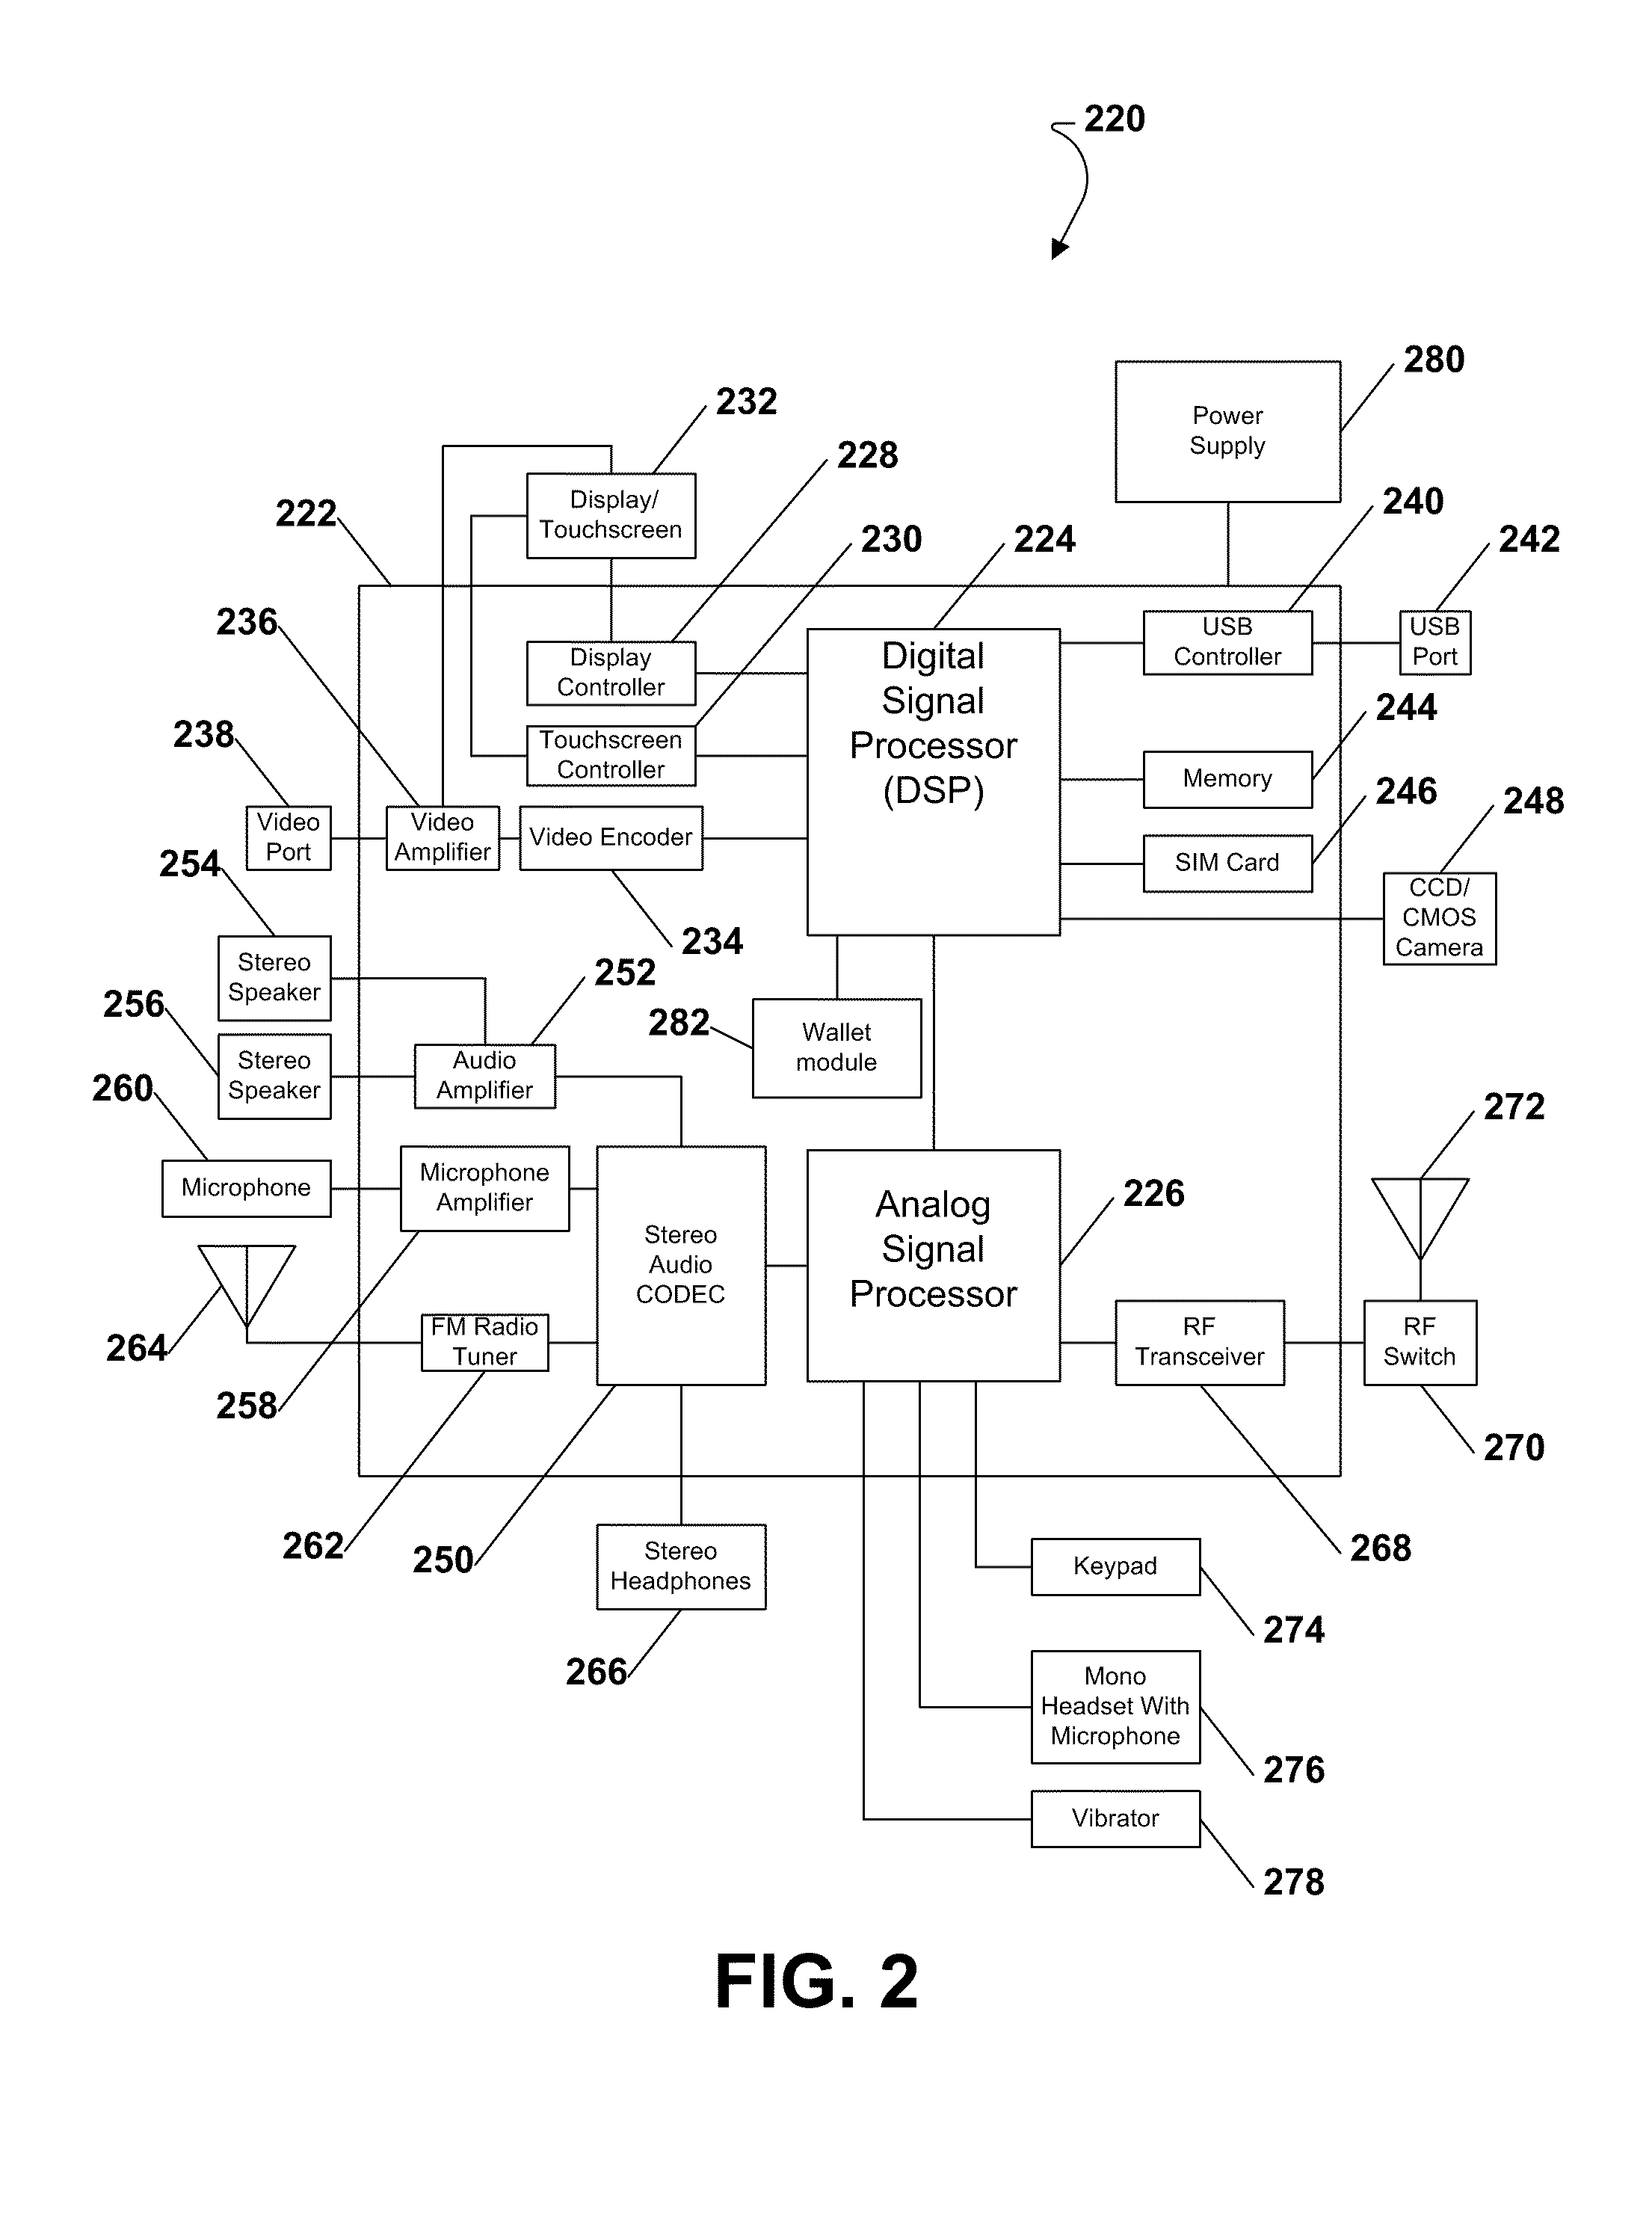 System and method of providing a mobile wallet at a mobile telephone